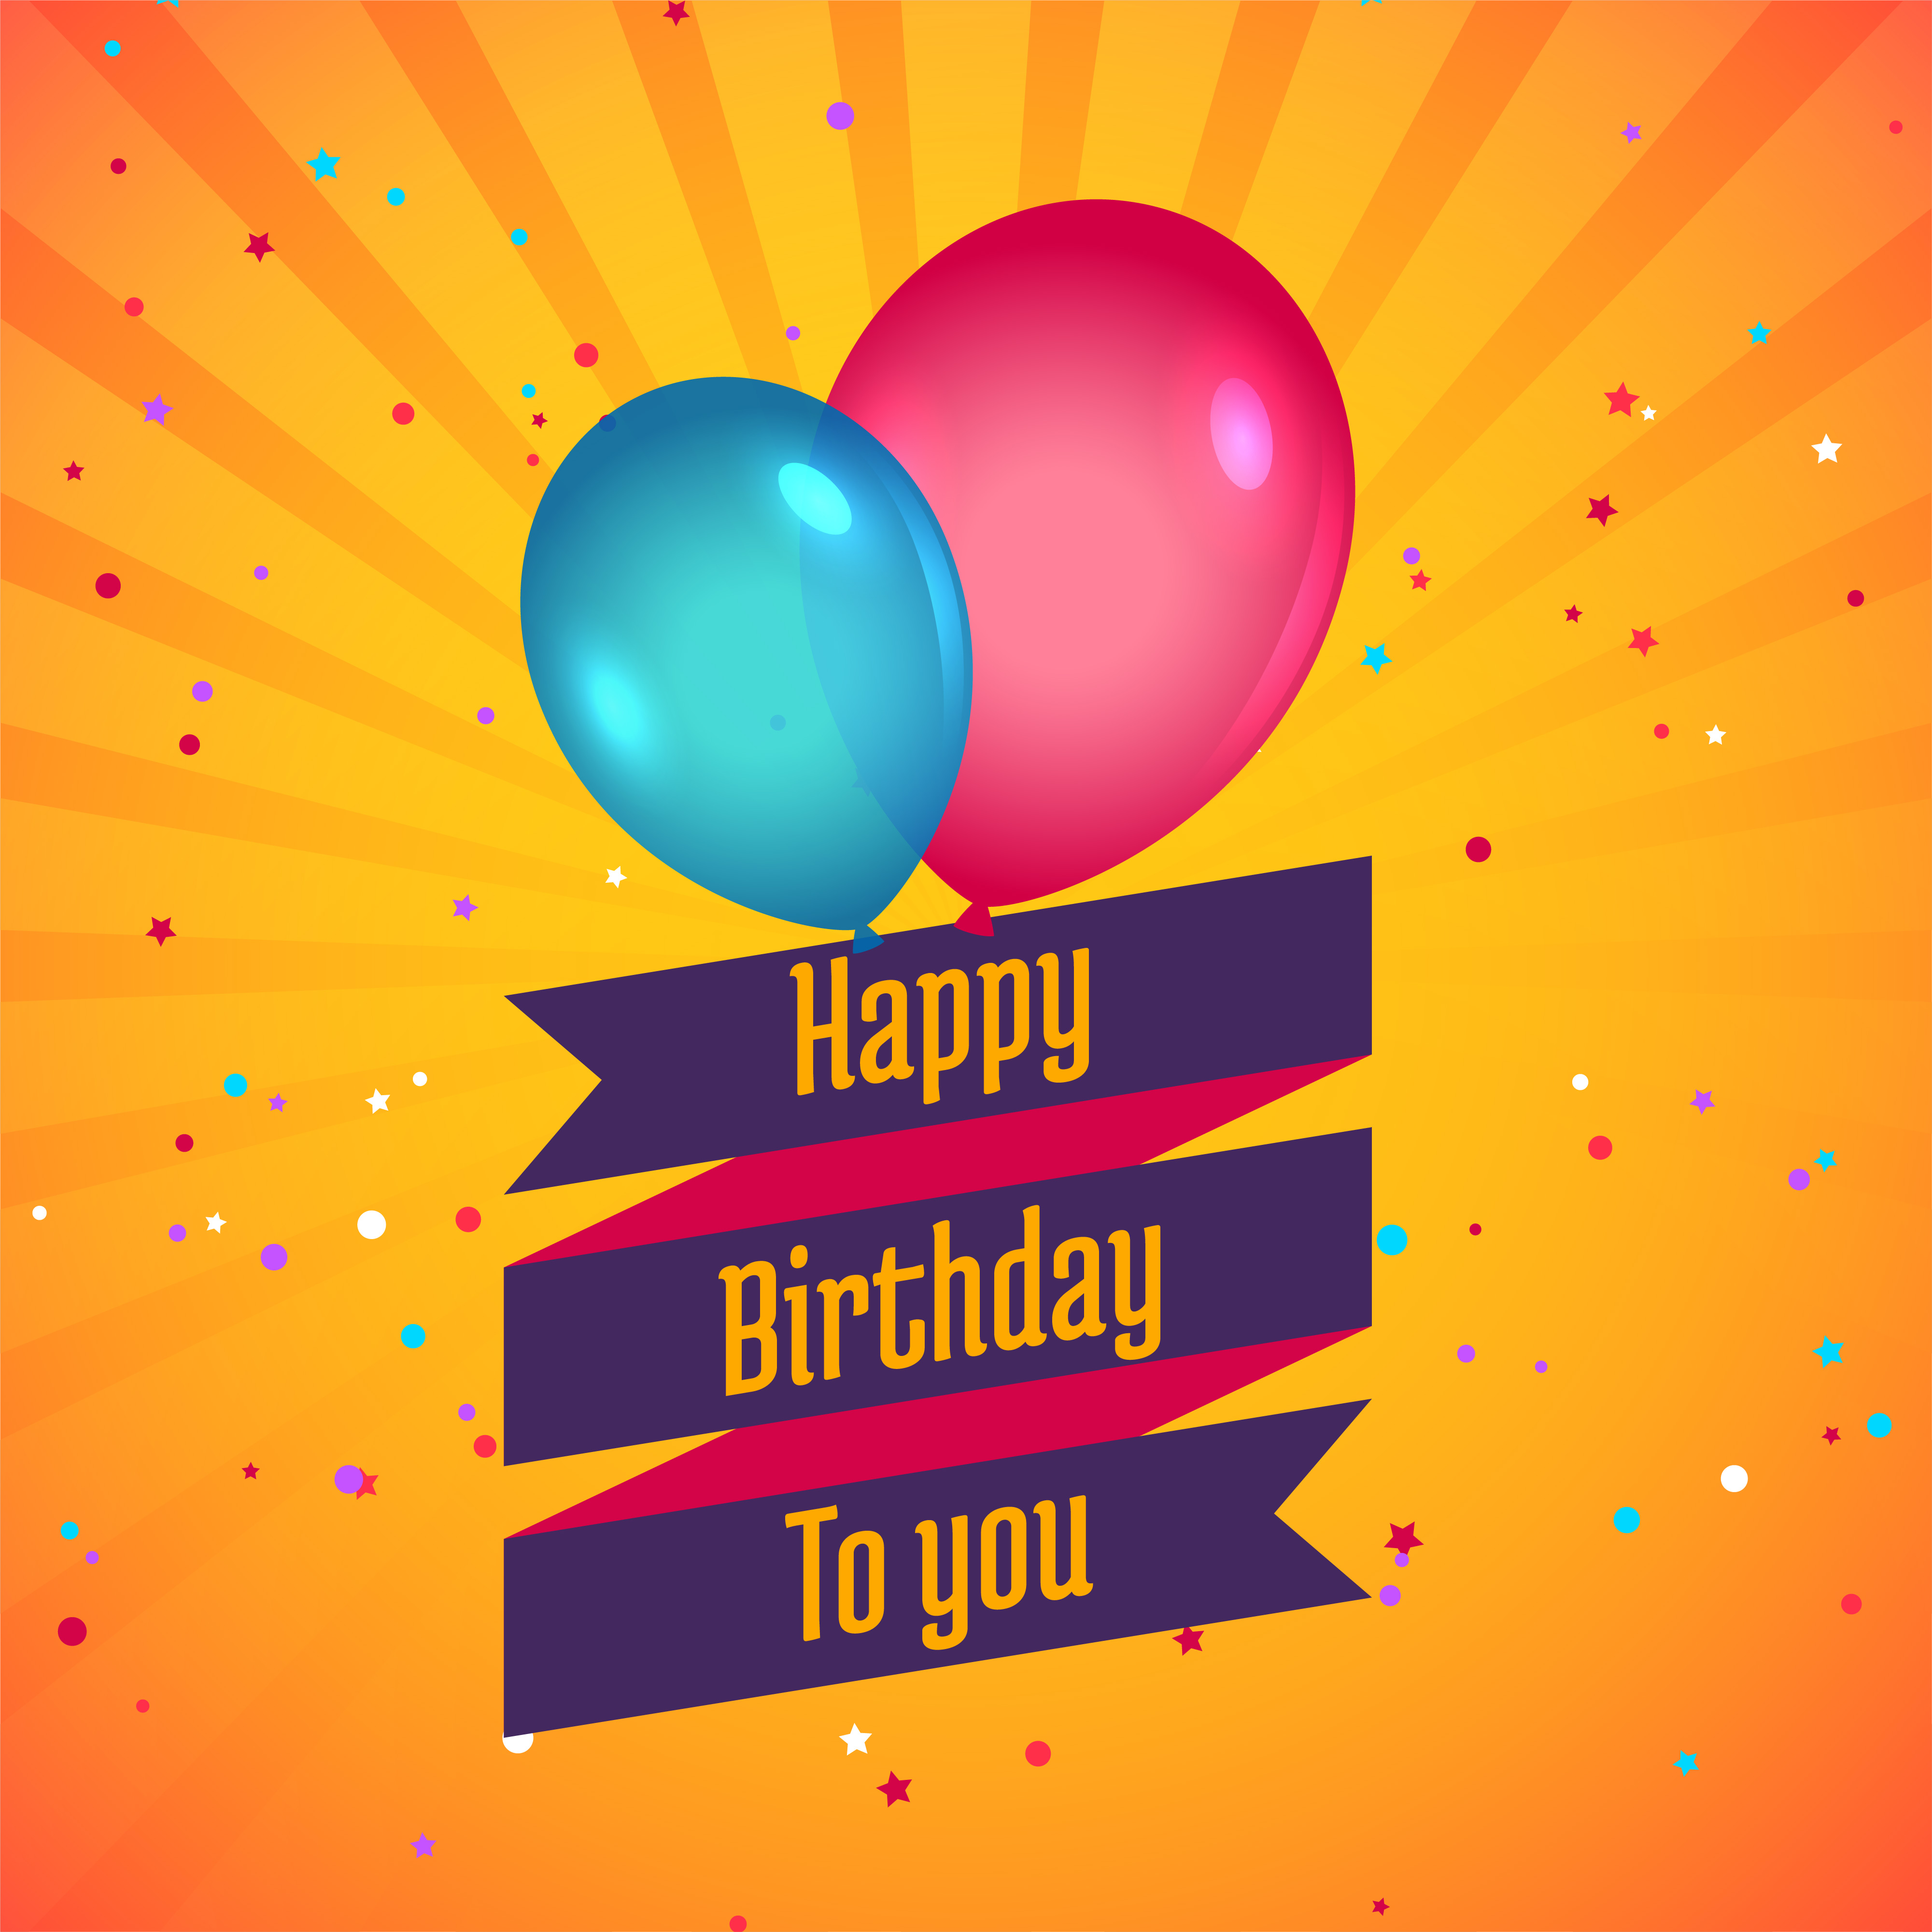 Download happy birthday celebration card with balloons - Download ...